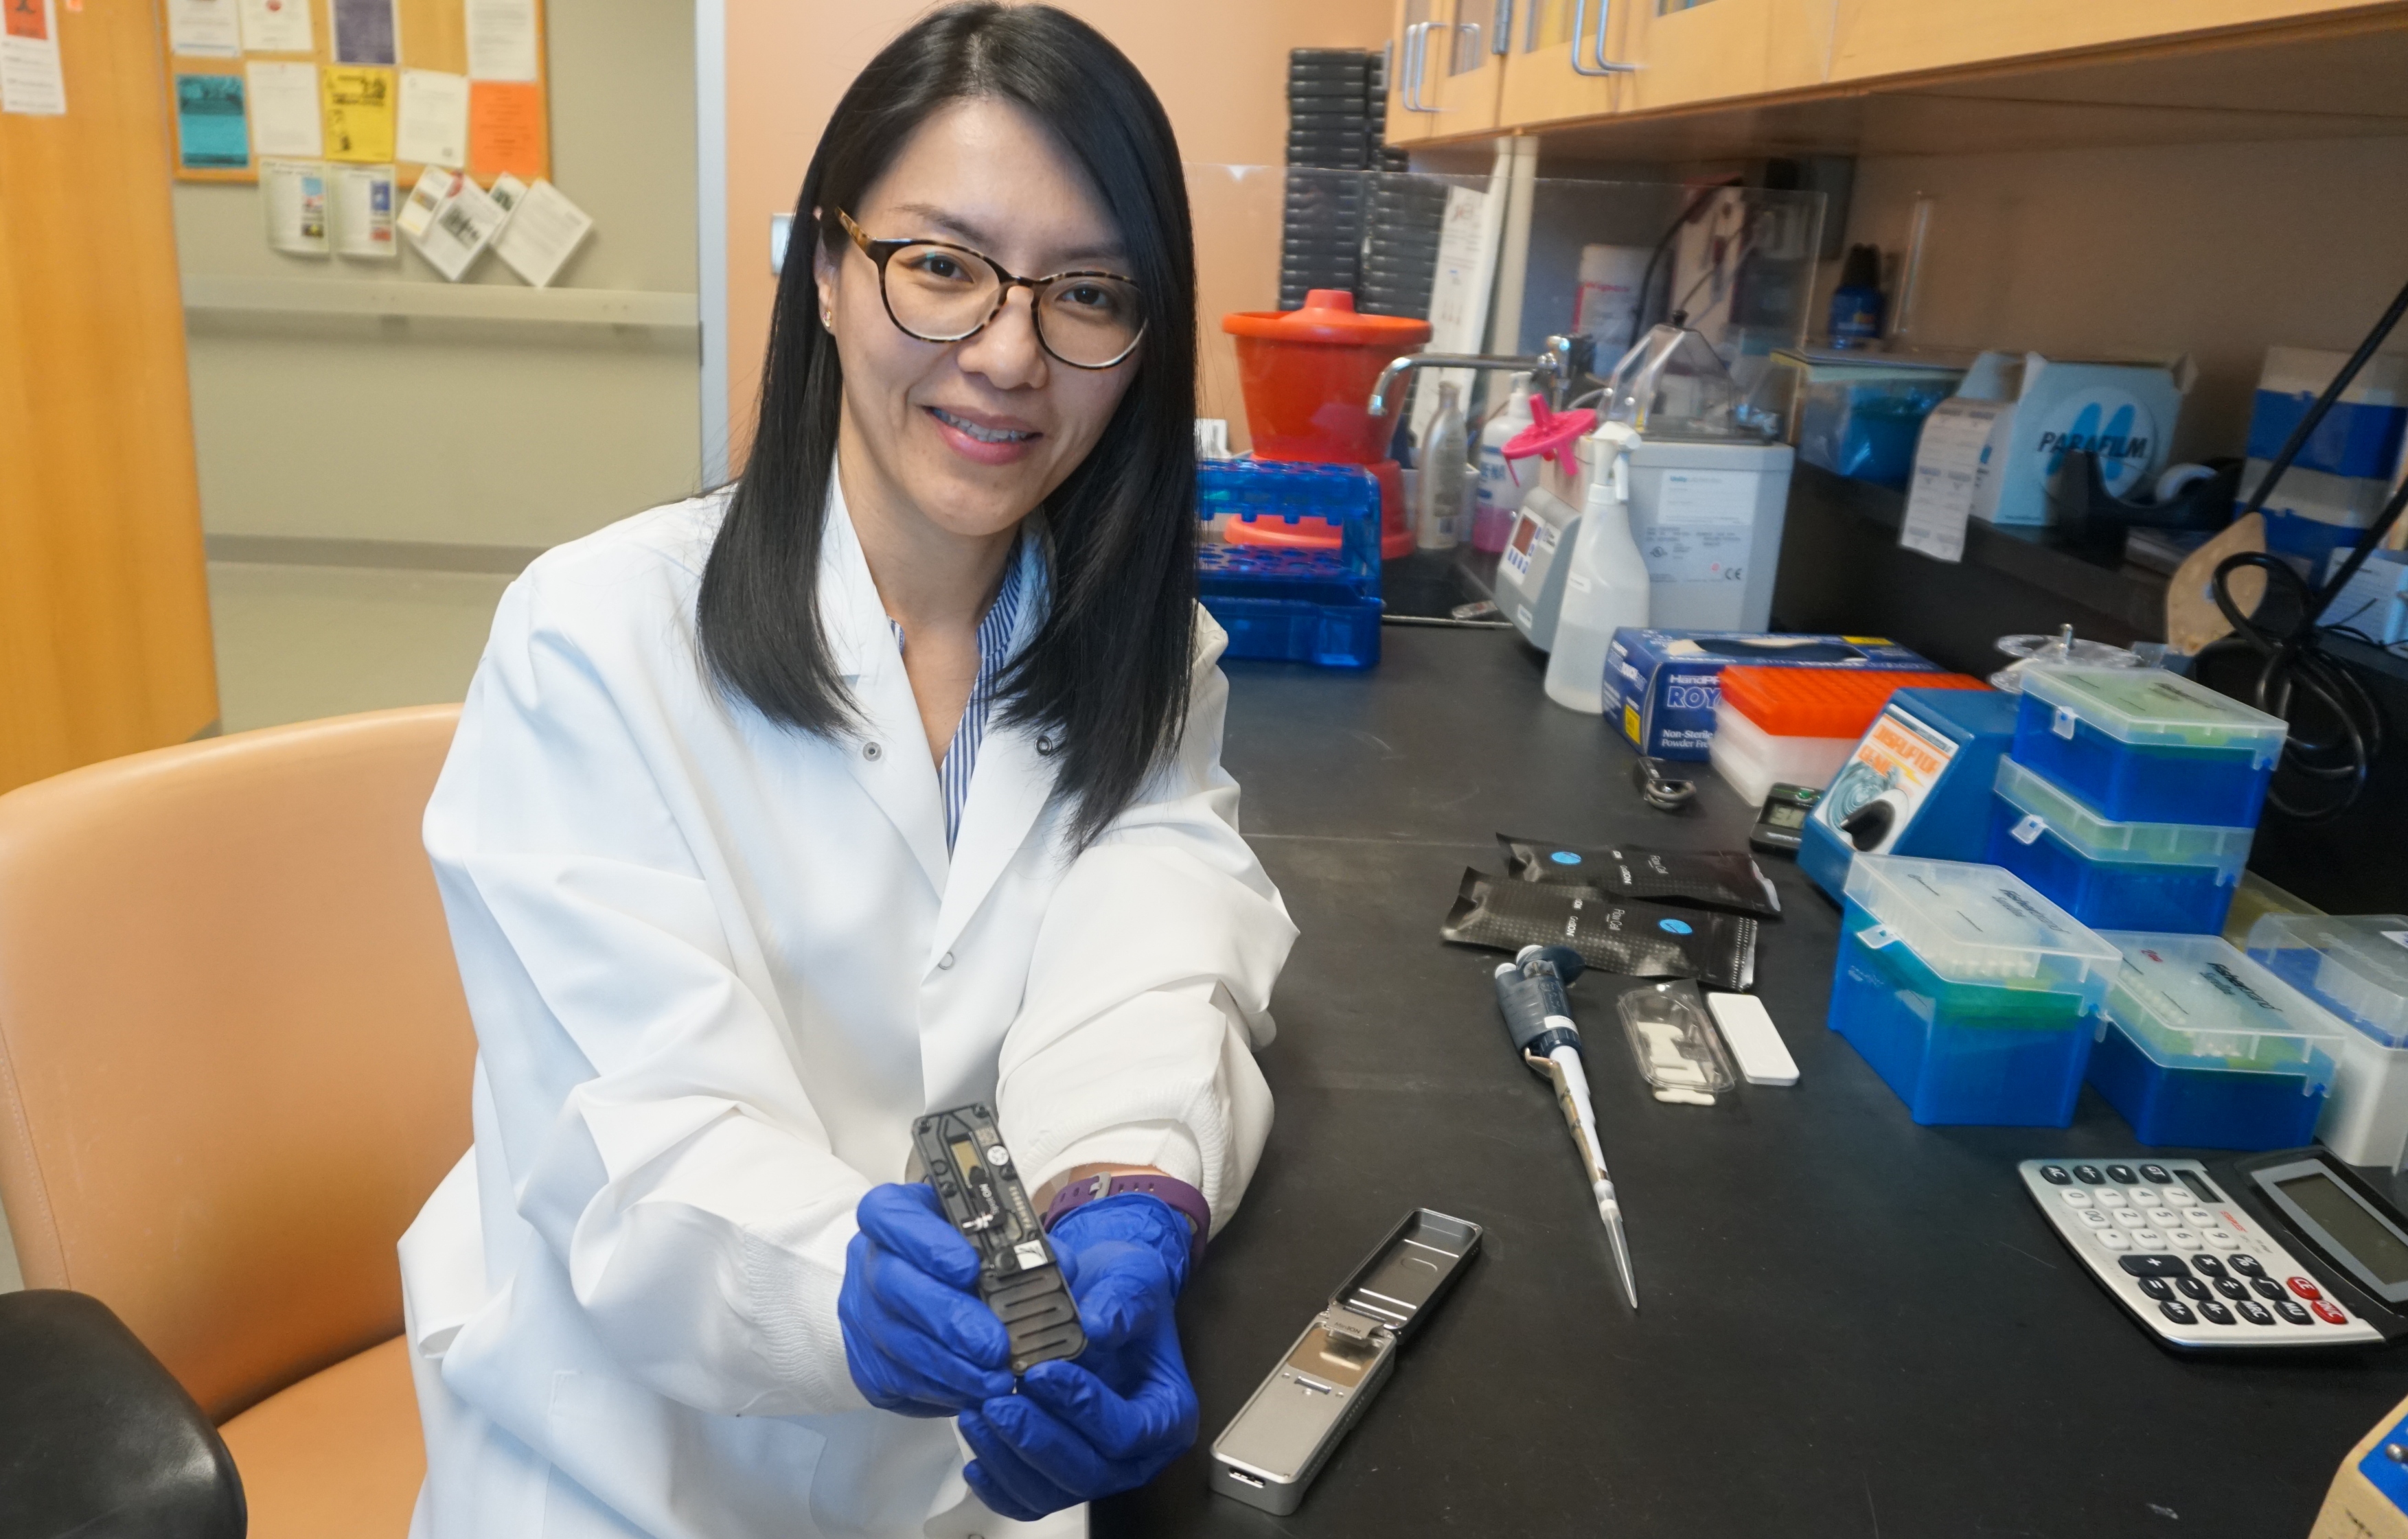 Thidathip (Tip) Wongsurawat, Ph.D., with the hand-held nanopore device used for the first time to sequence multiple viruses.